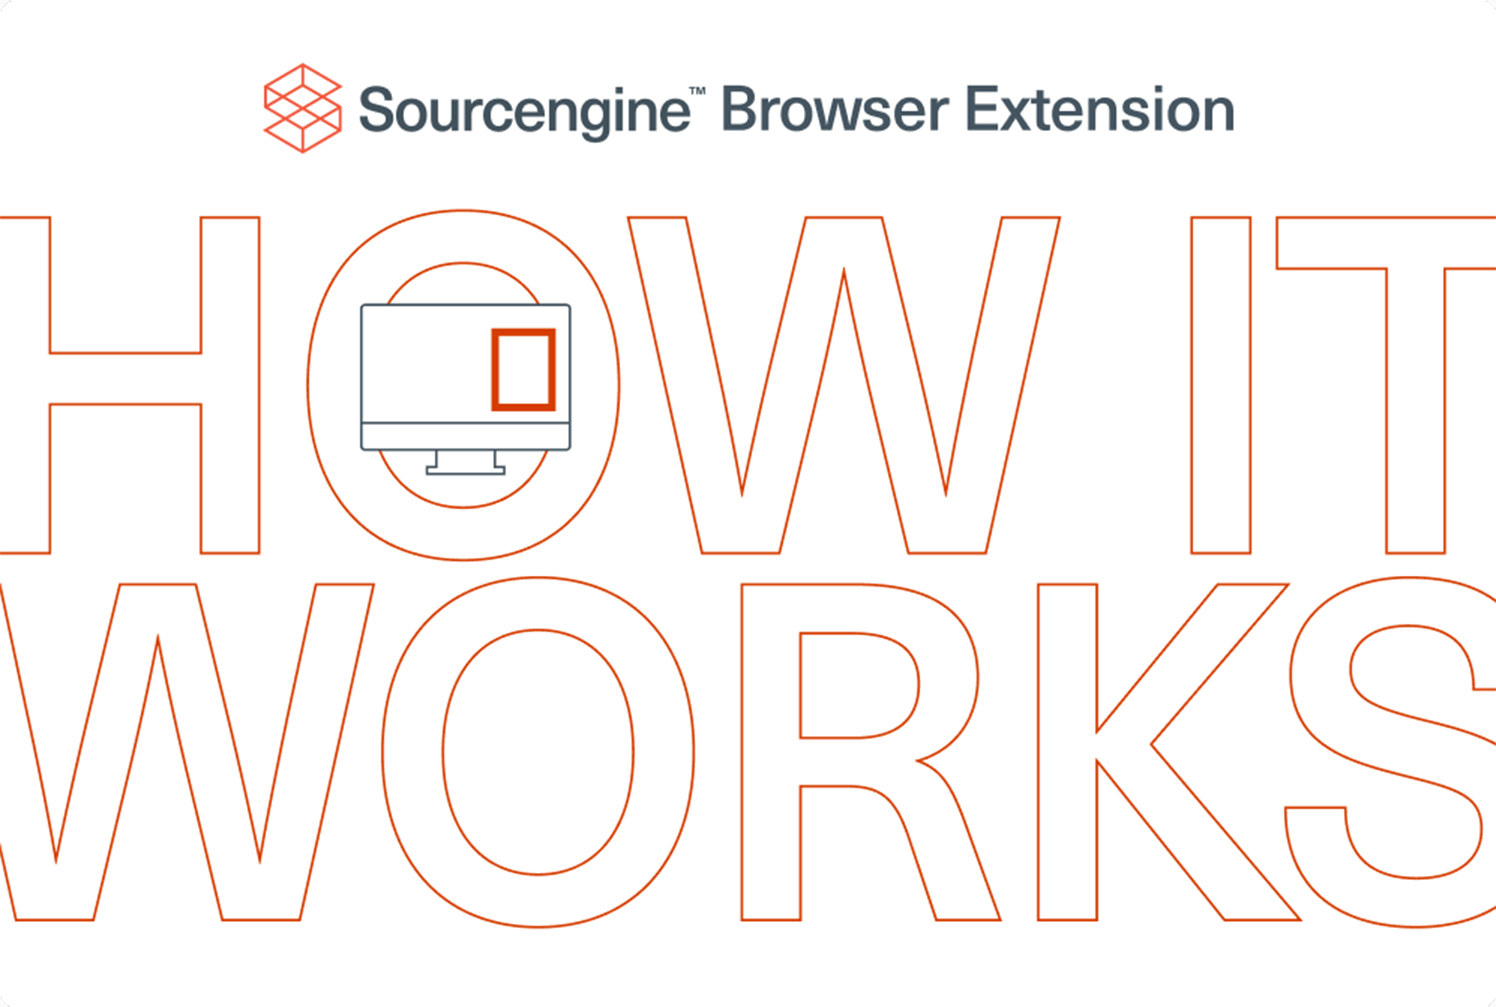 stylized text saying "sourcengine browser extension - how it works"